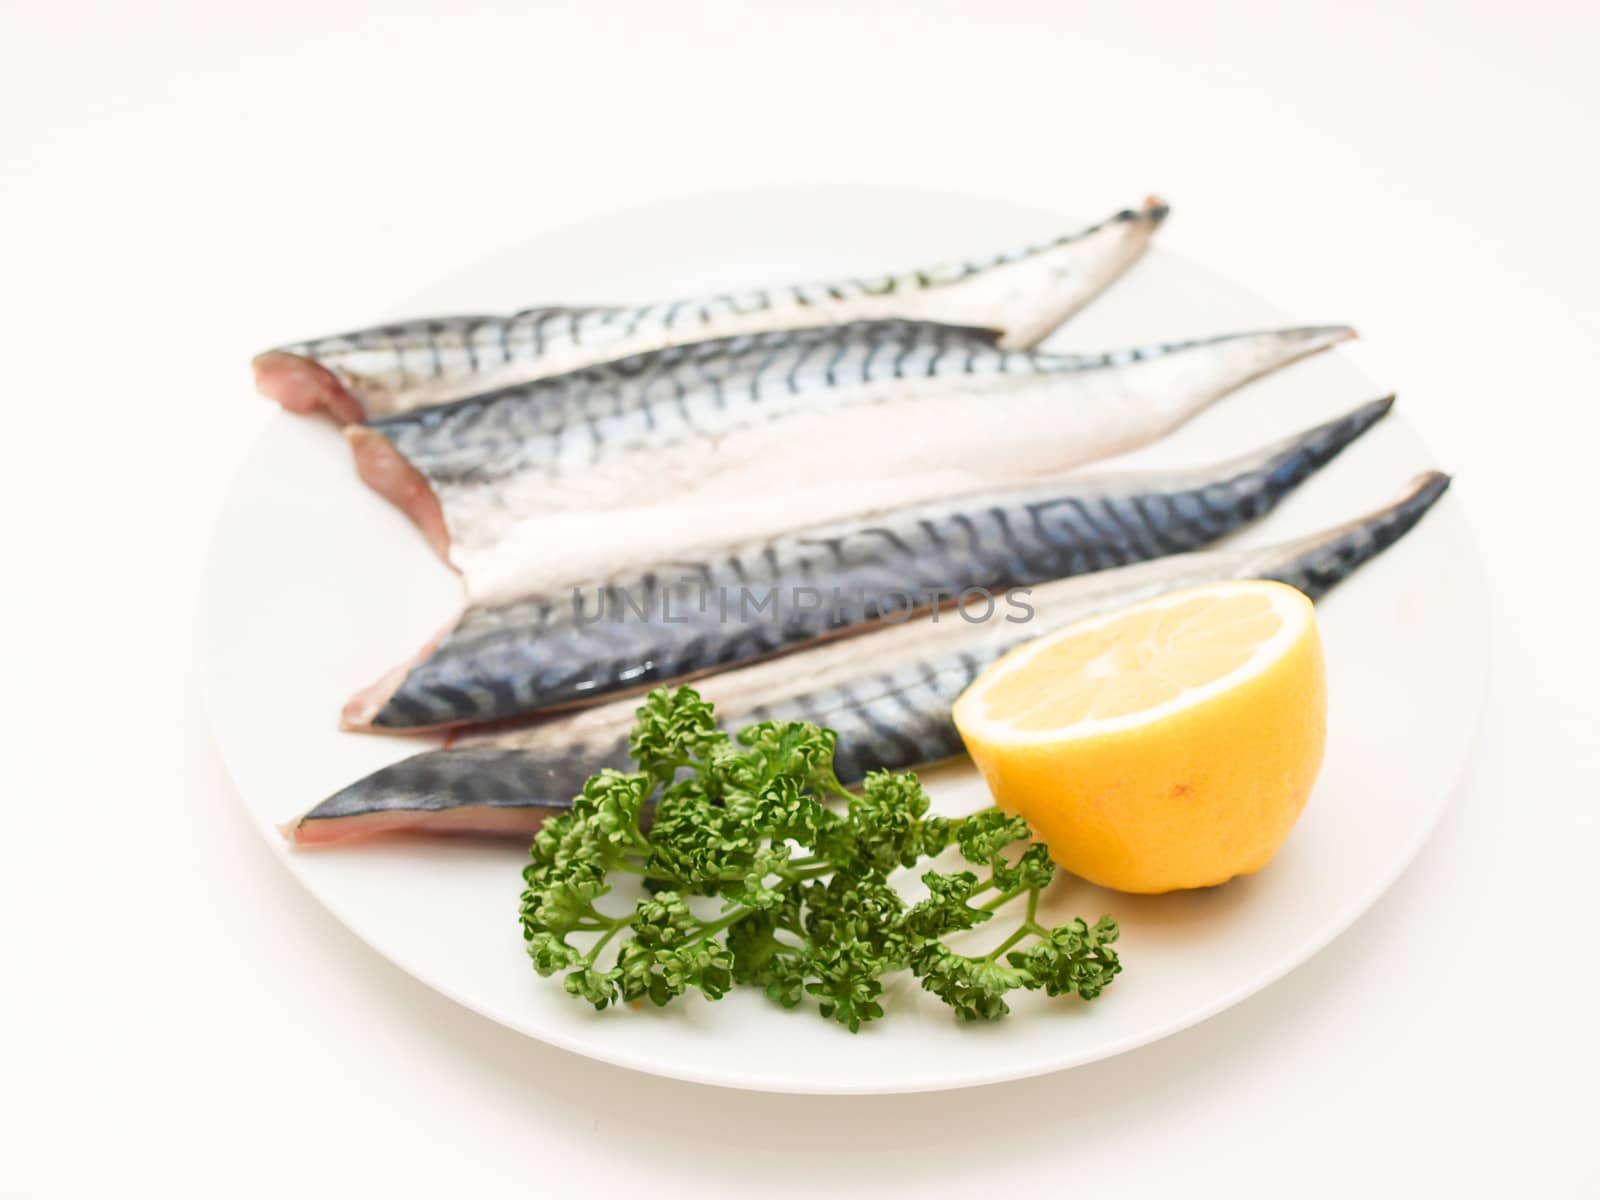 Raw mackerel fish filet with half a lemon and parsley on white plate